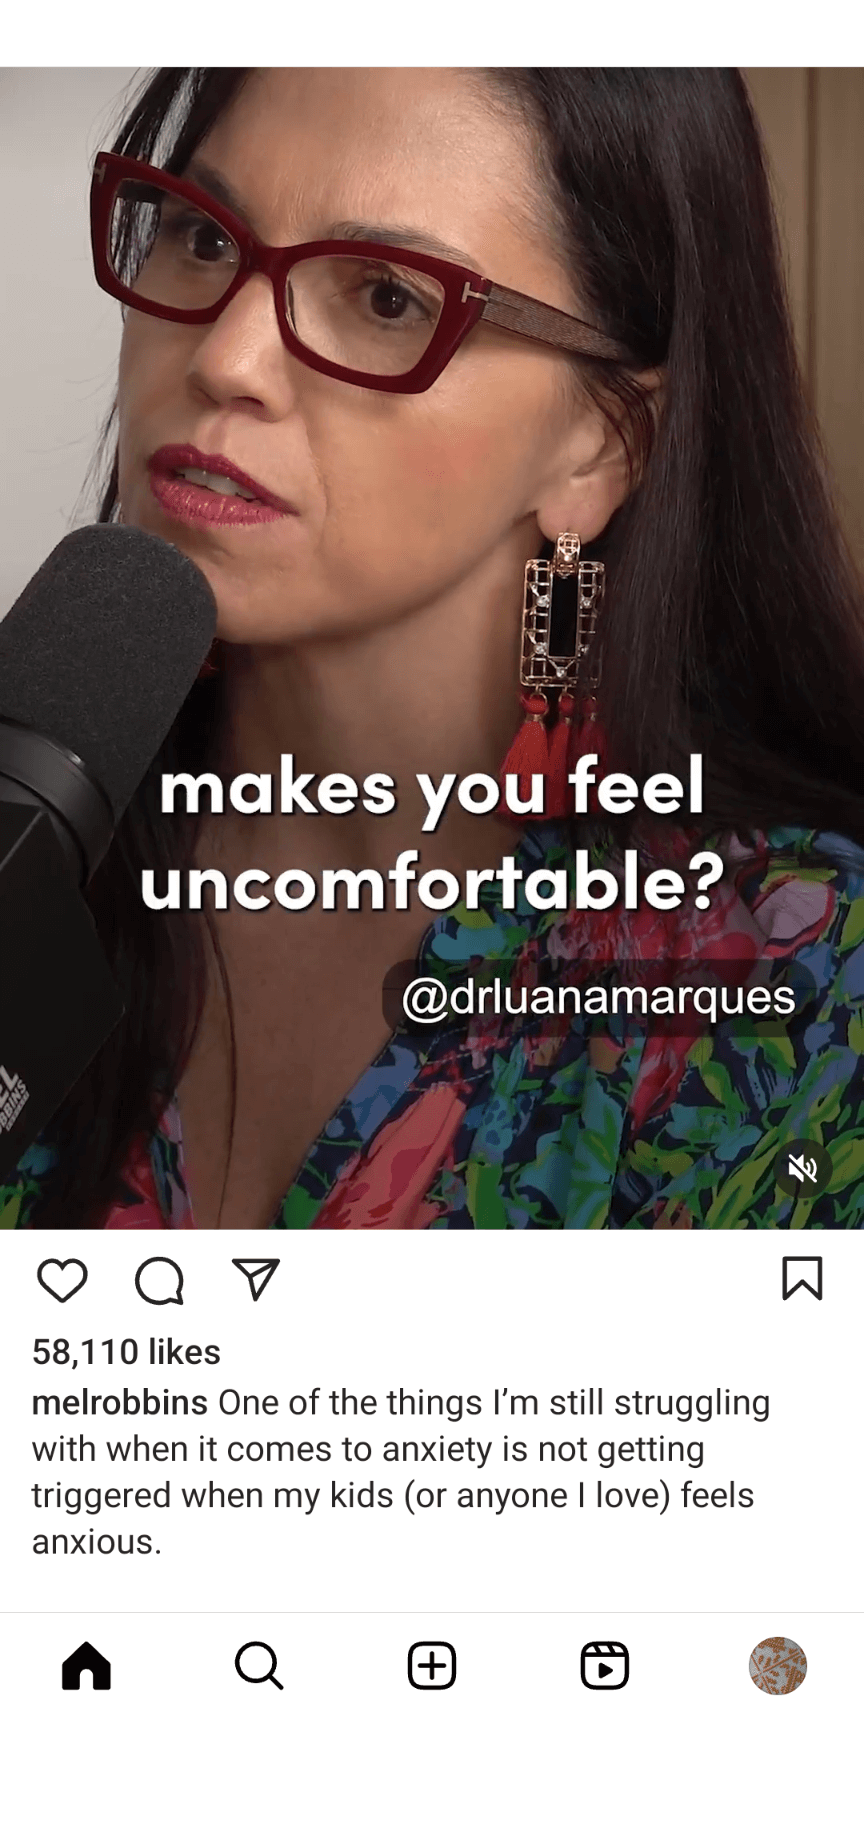 mel-robbins-podcast-clip-discusses-anxiety-with-dr-luana-marques-instagram